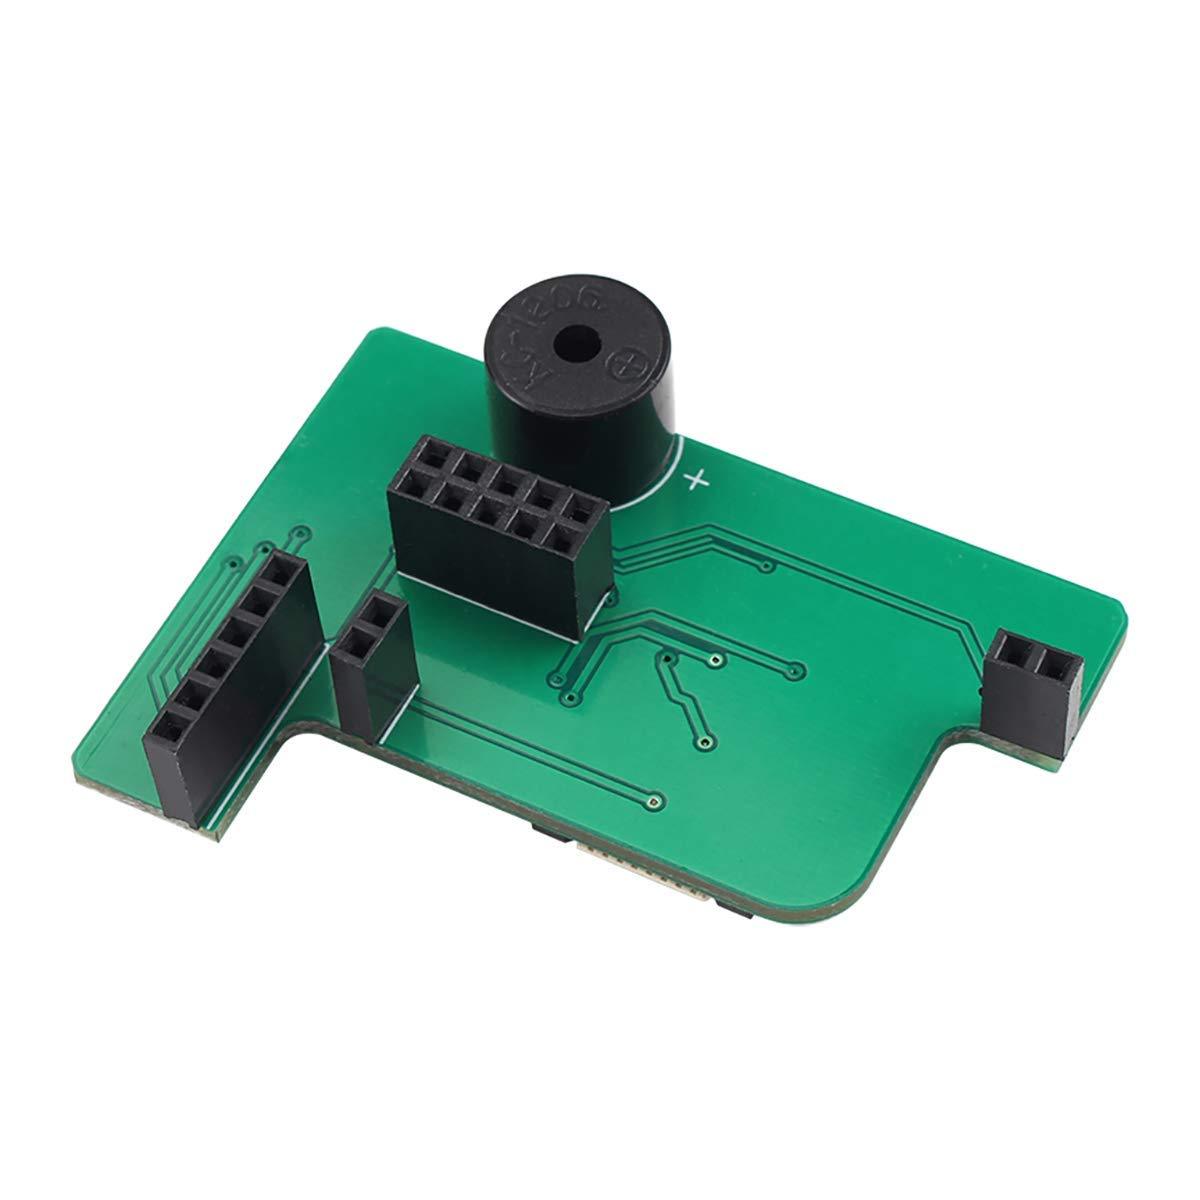 Breakout Transfer Adapter Plate with Buzzer for ANYCUBIC Mega-i3 Mega-S 3D Printer Accessories